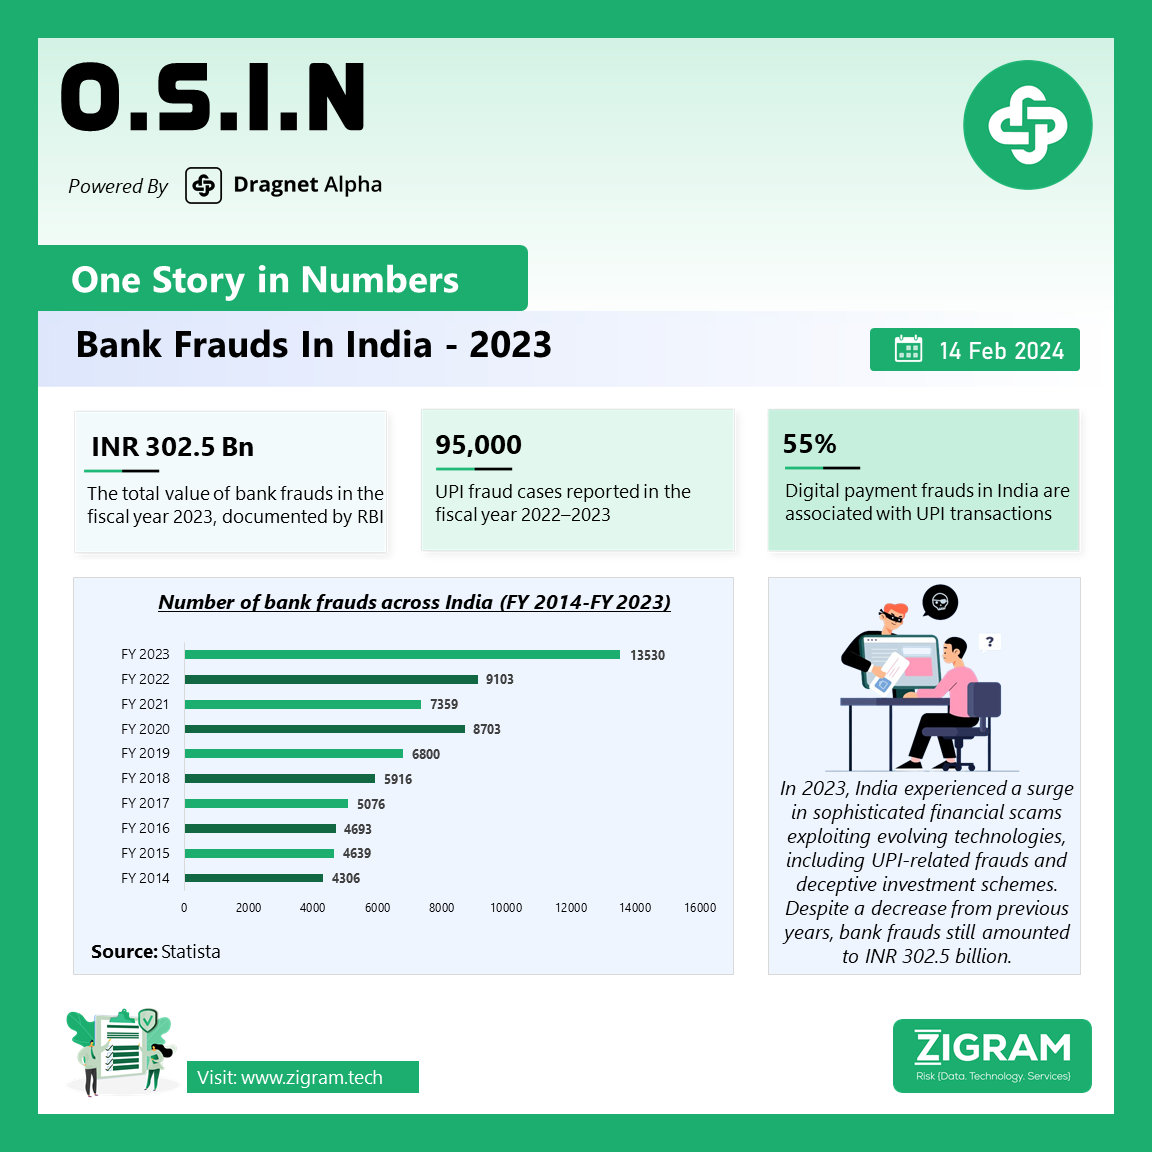 Bank Frauds In India 2023